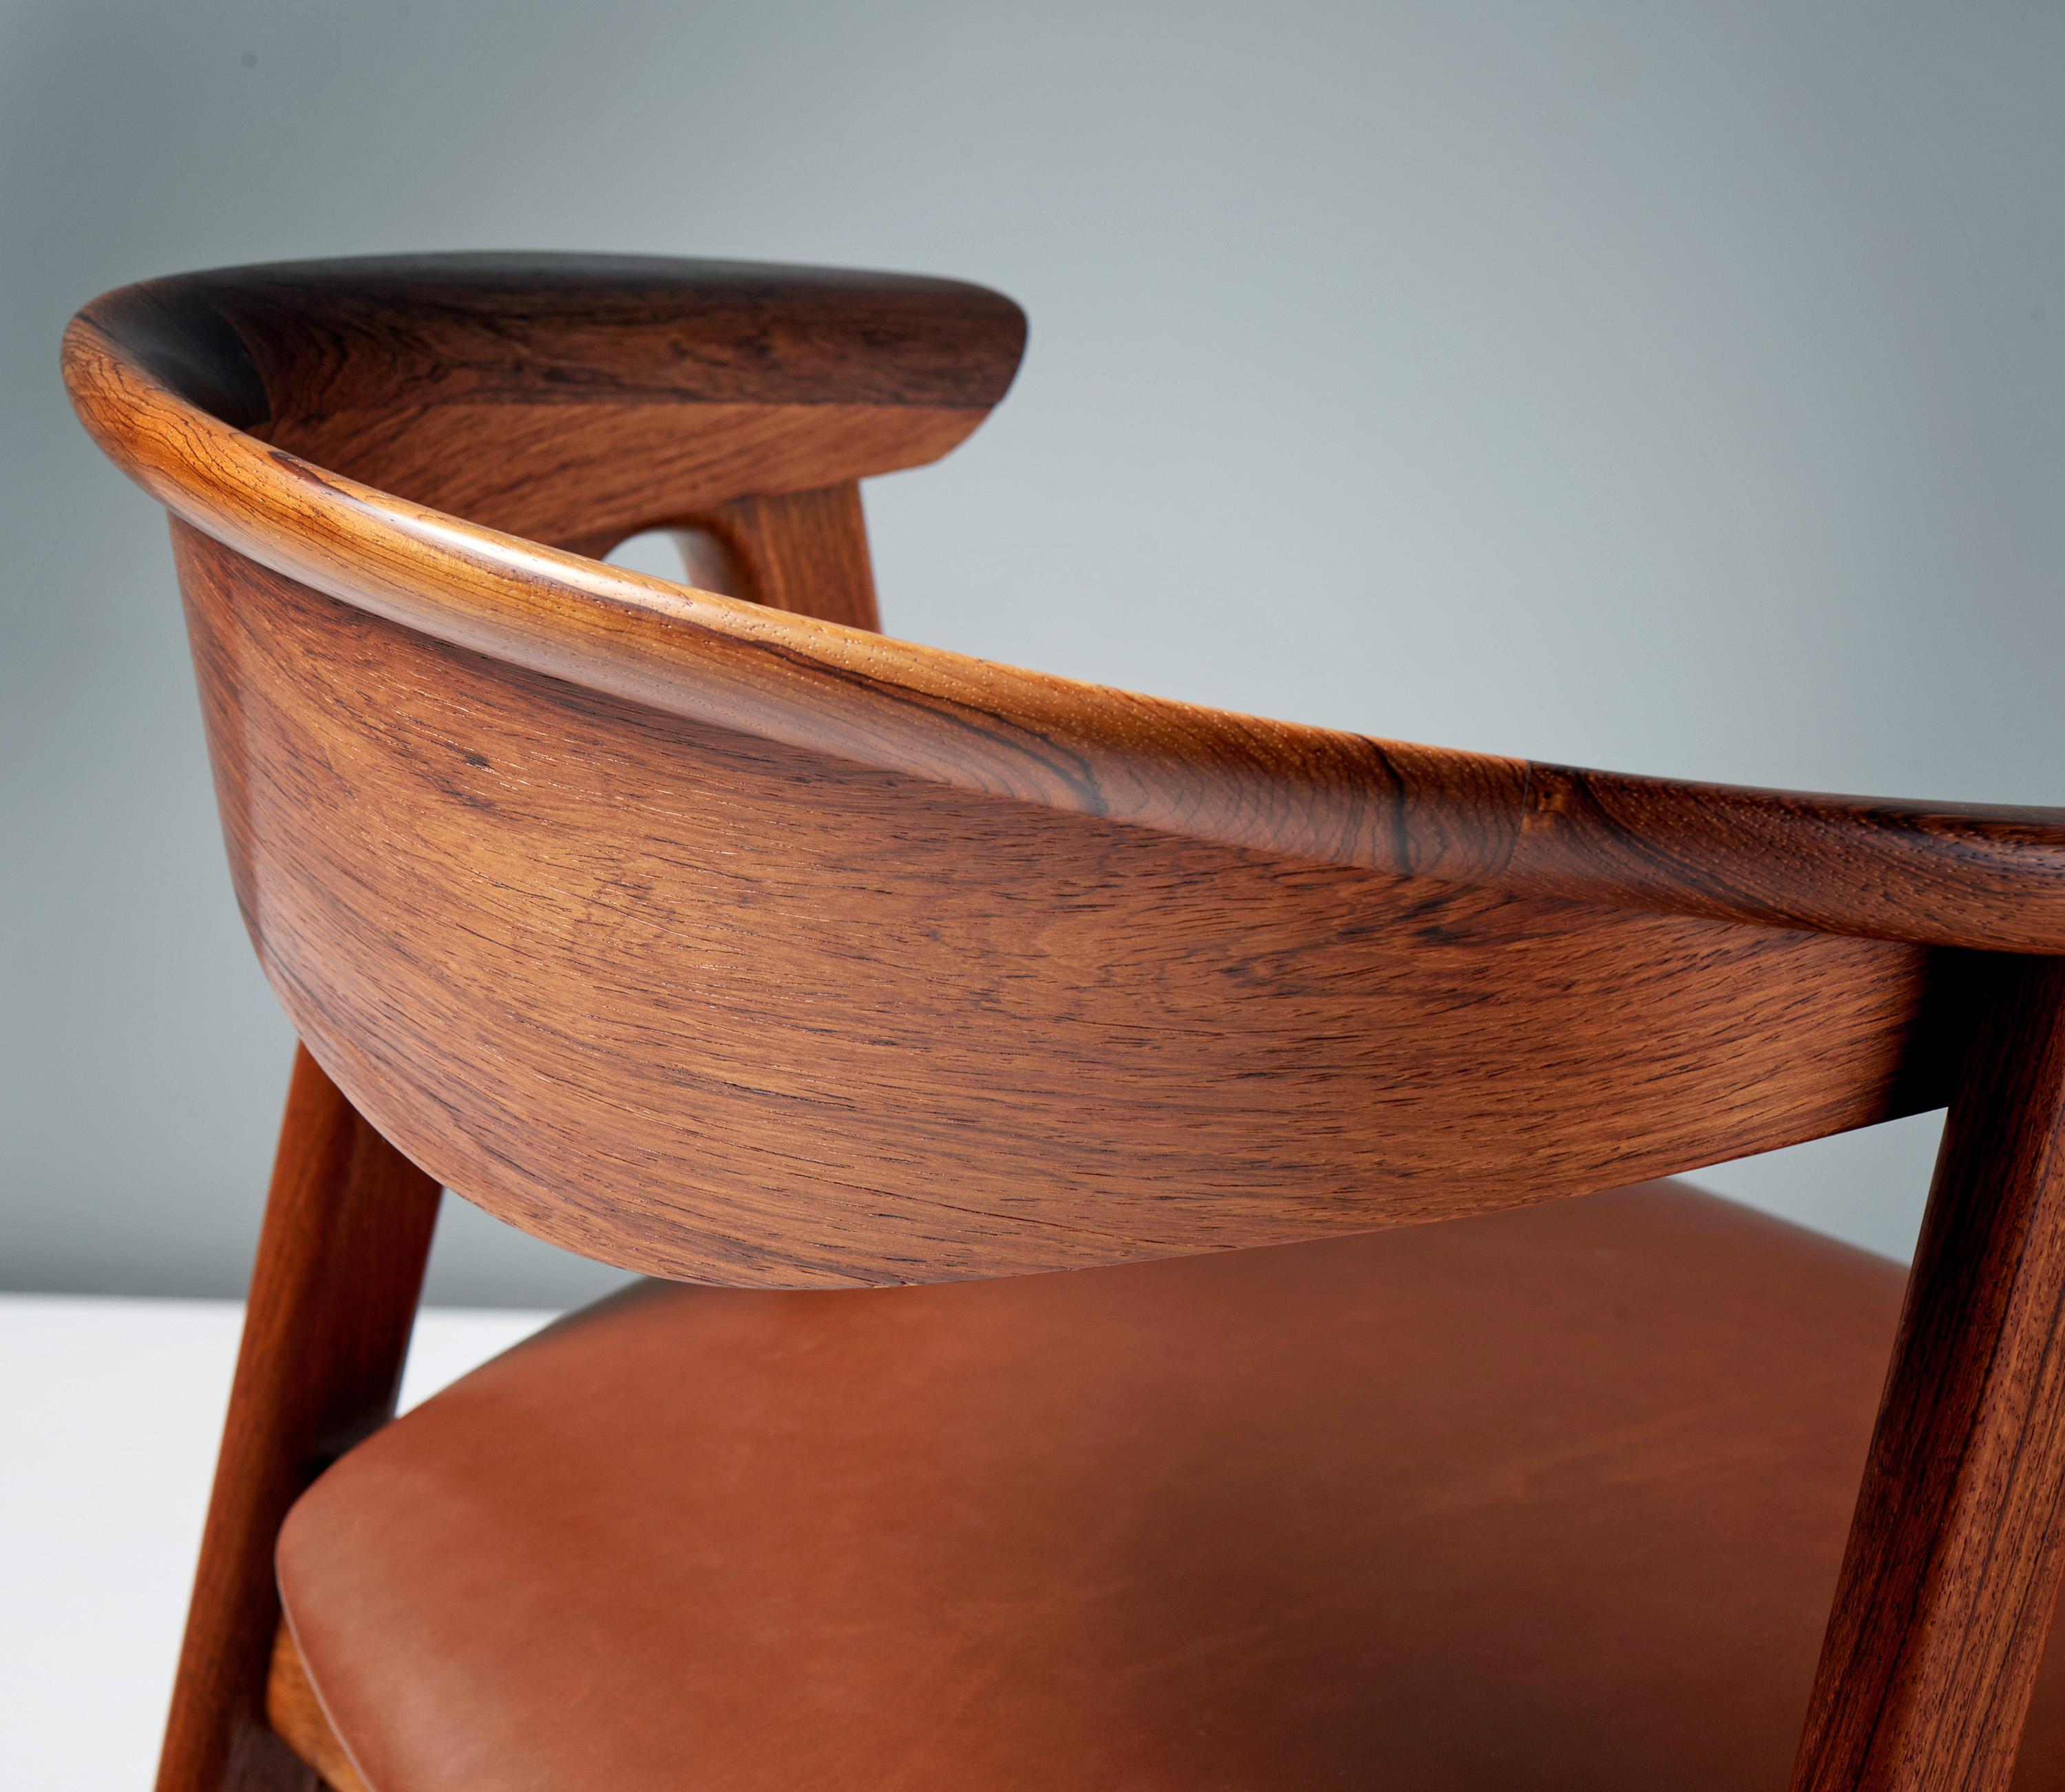 Erik Kirkegaard - Compass Desk Chair, c1960s

A rare and highly sought-after desk chair by Erik Kirkegaard, produced by Hong Stolefabrik in Denmark, circa 1956. The curved back provides exceptional comfort and is made from solid and veneered